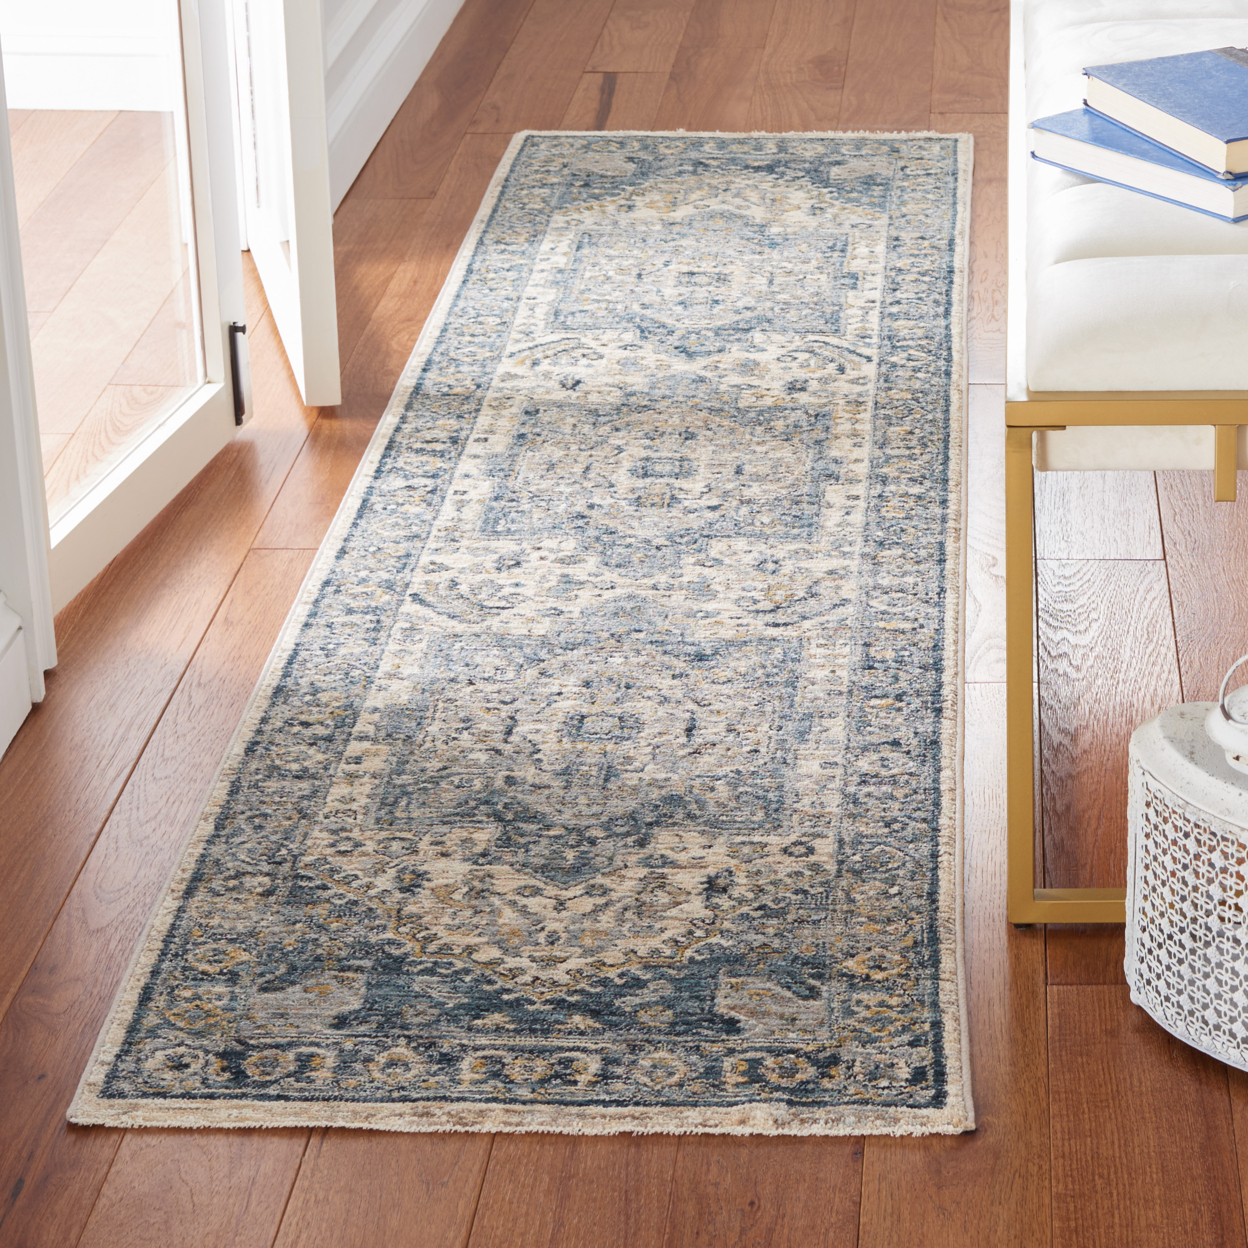 SAFAVIEH Valencia Collection VAL568A Ivory / Blue Rug - 5' X 8'